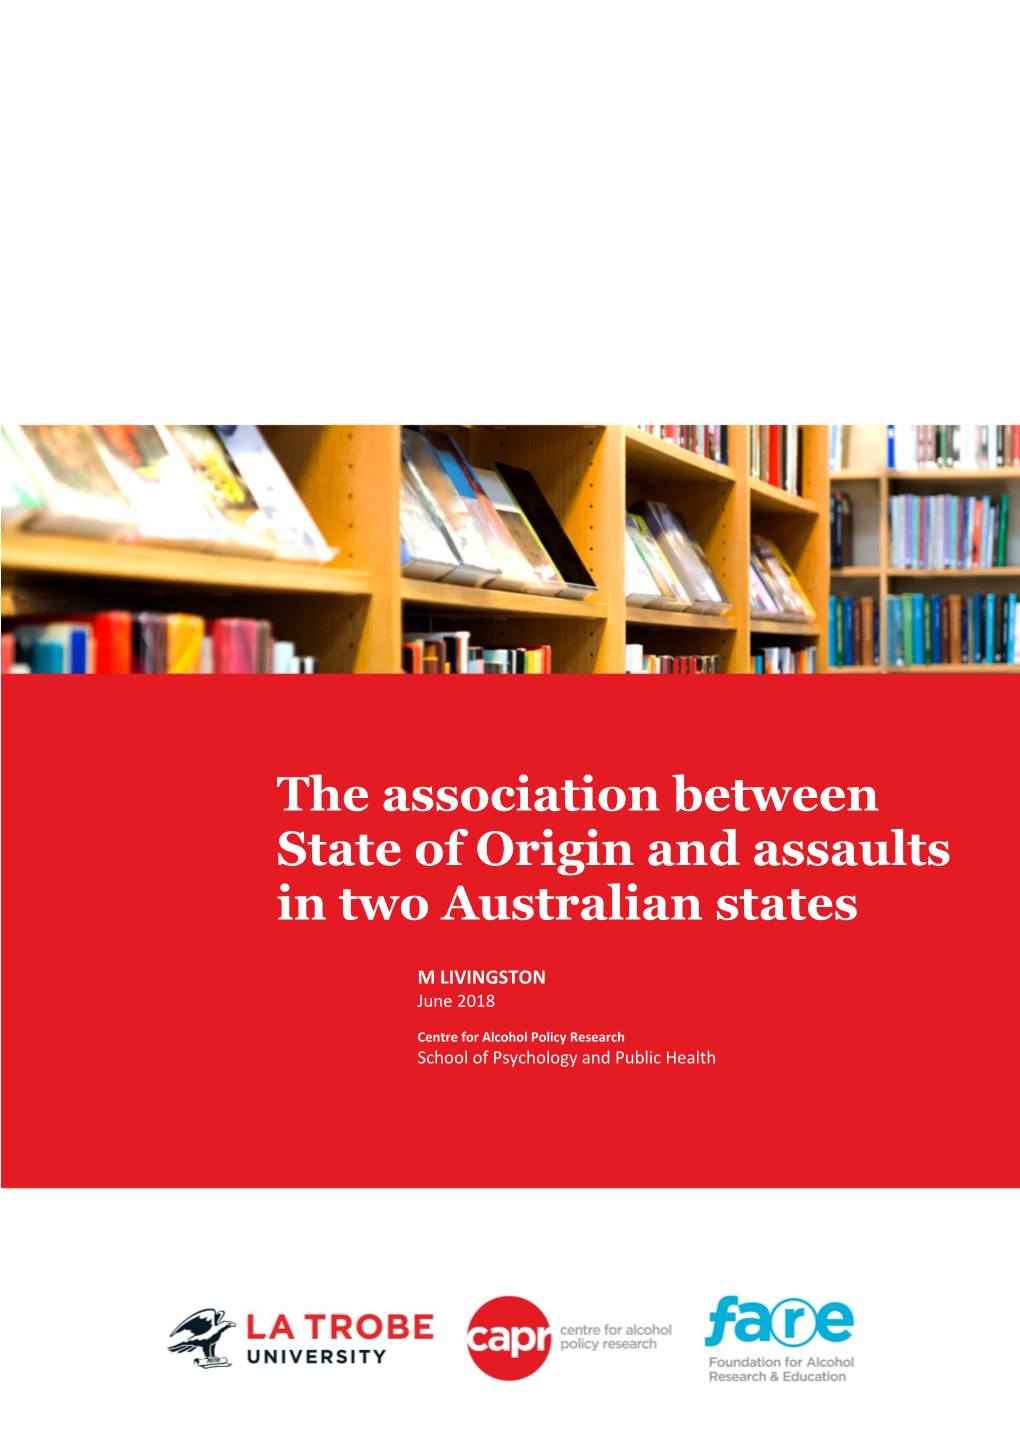 The Association Between State of Origin and Assaults in Two Australian States